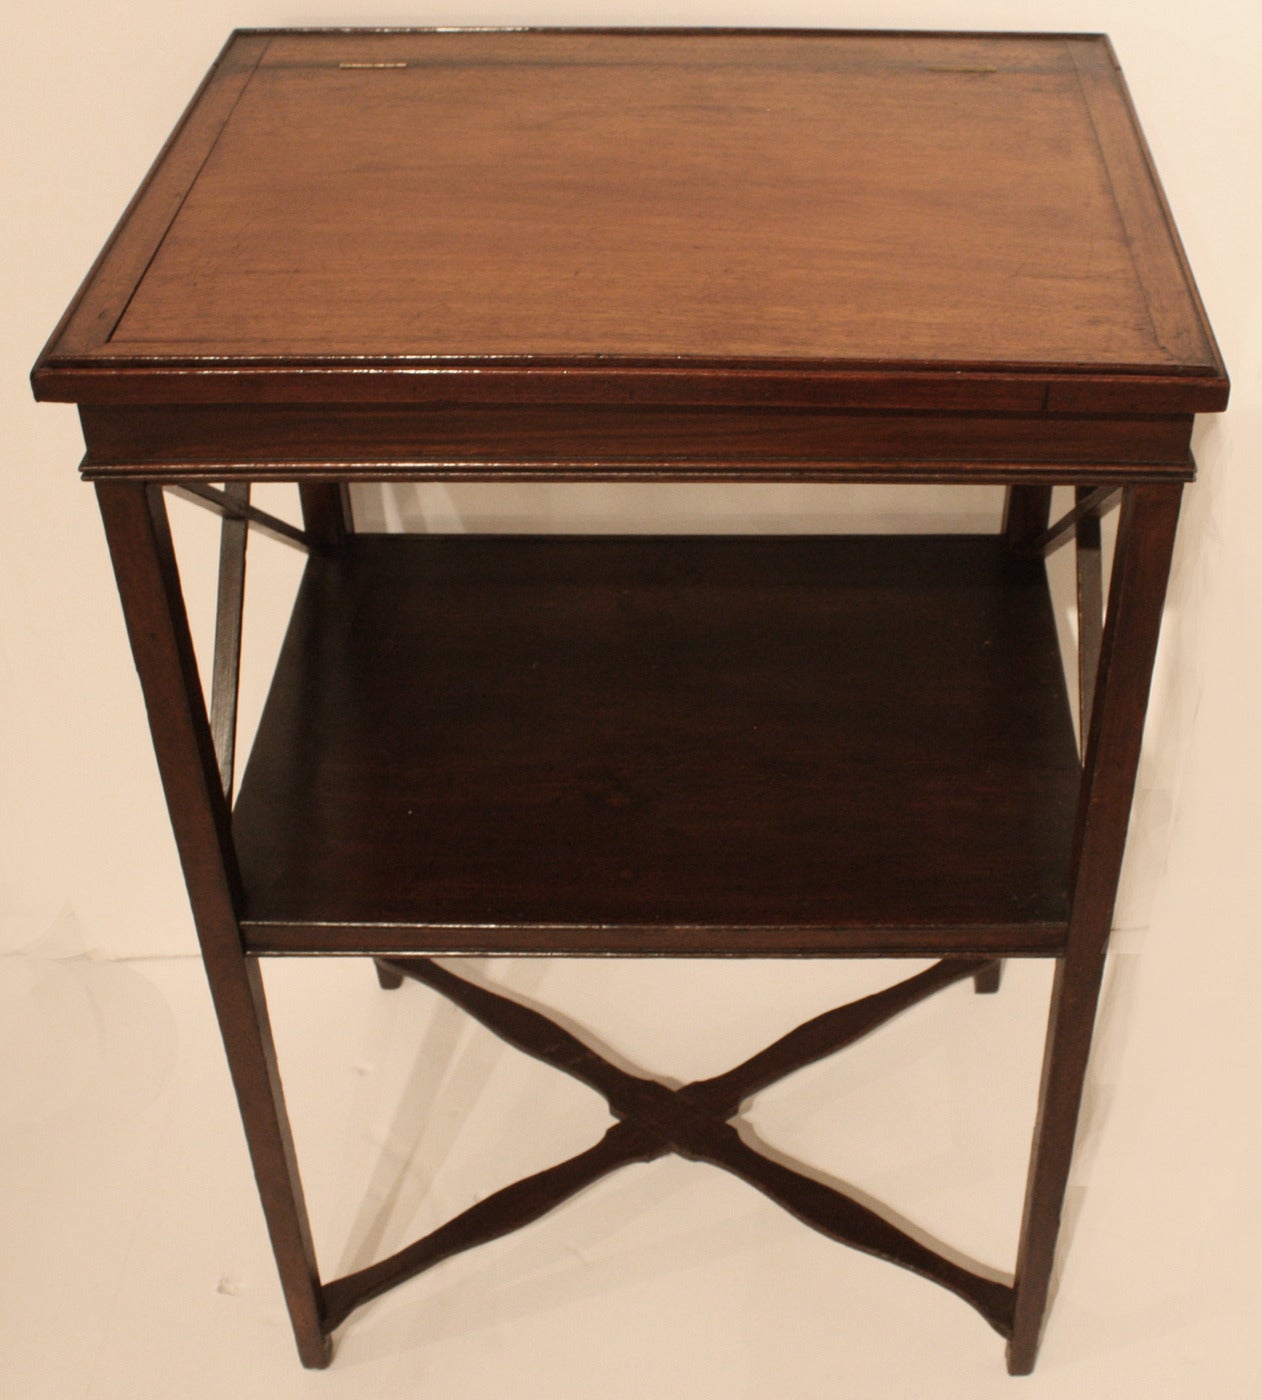 Important antique American standing desk crafted in mahogany and pine. The mahogany writing surface retains its original patina and lifts to reveal a storage compartment. Underneath the desk is the original hand-forged iron 